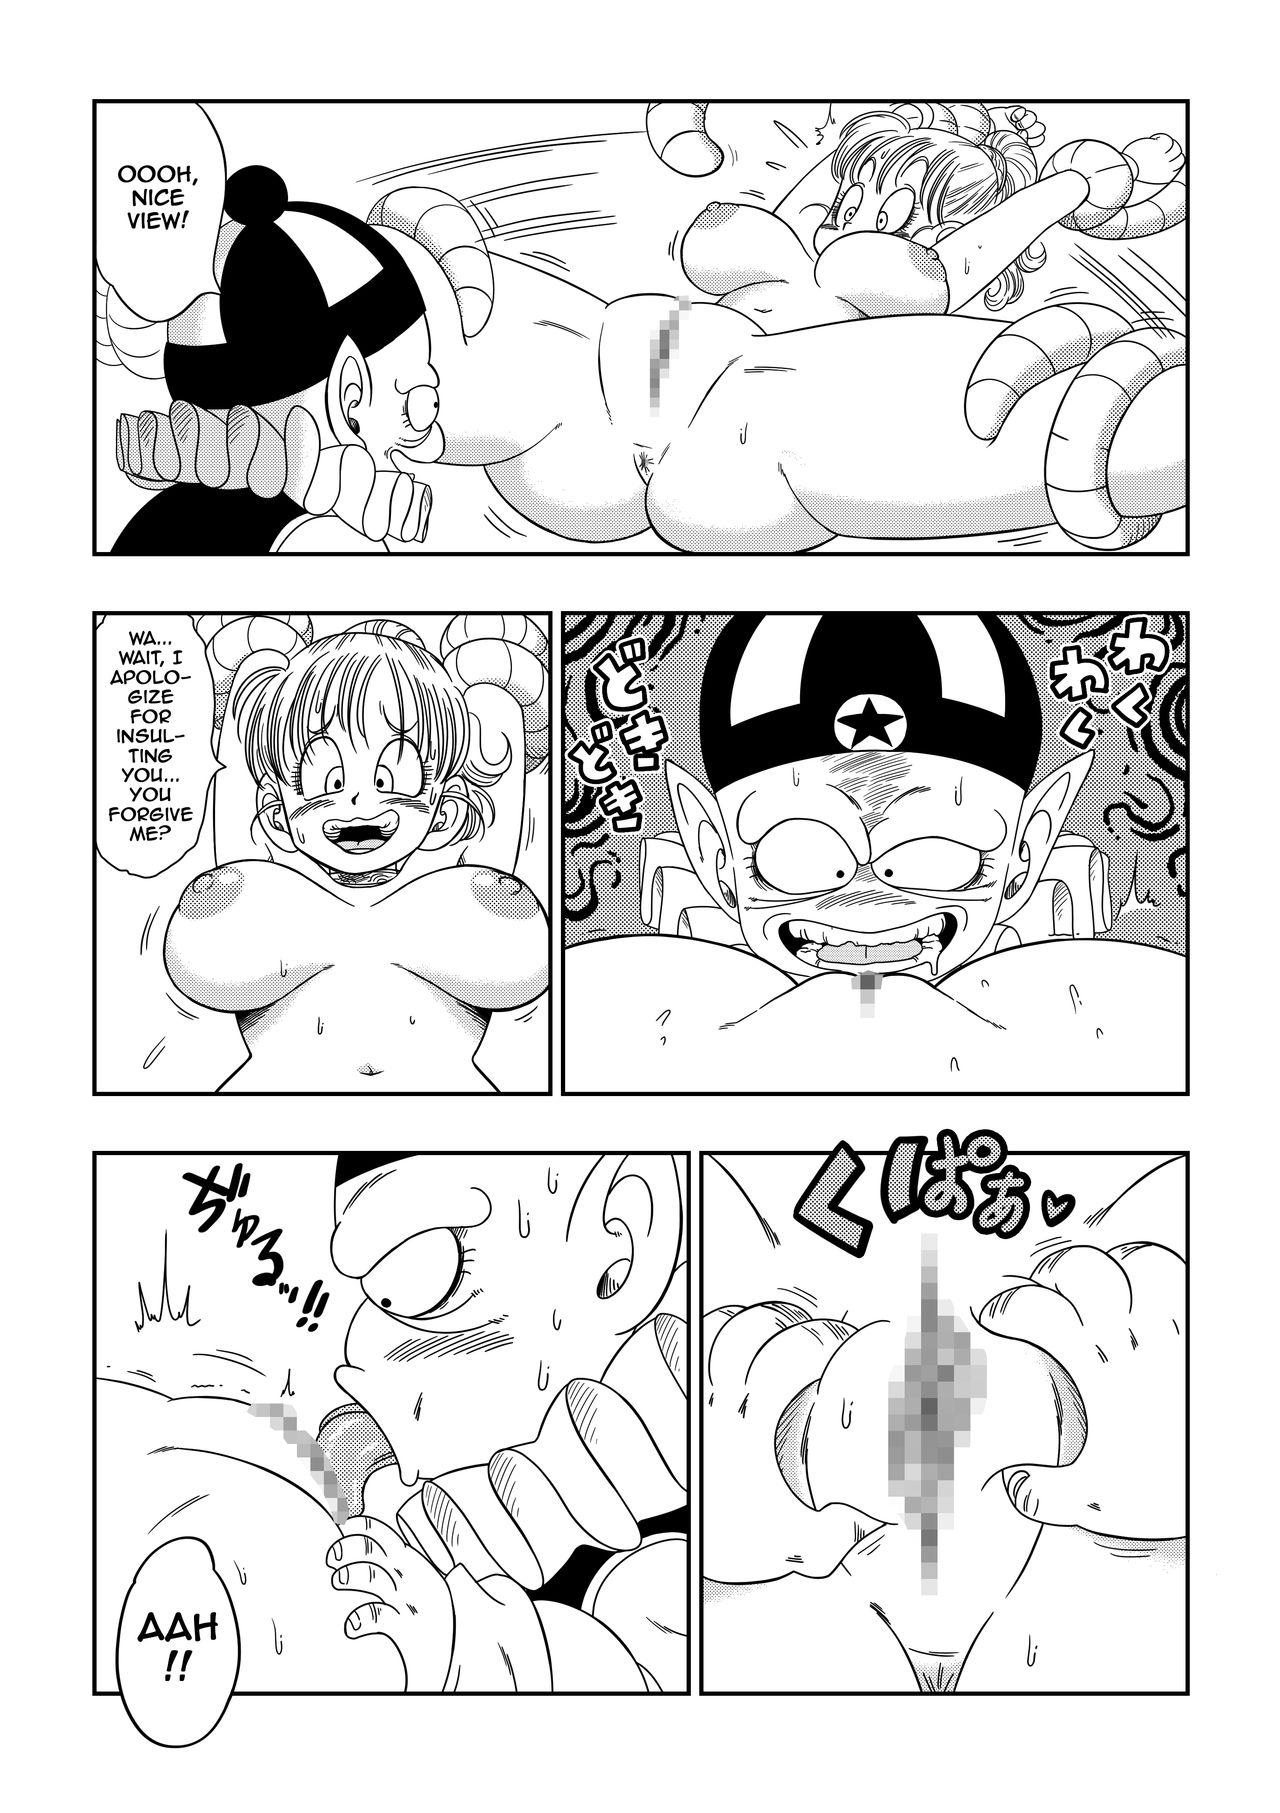 Free Rough Porn Dagon Ball - Punishment in Pilaf's Castle - Dragon ball Free - Page 6